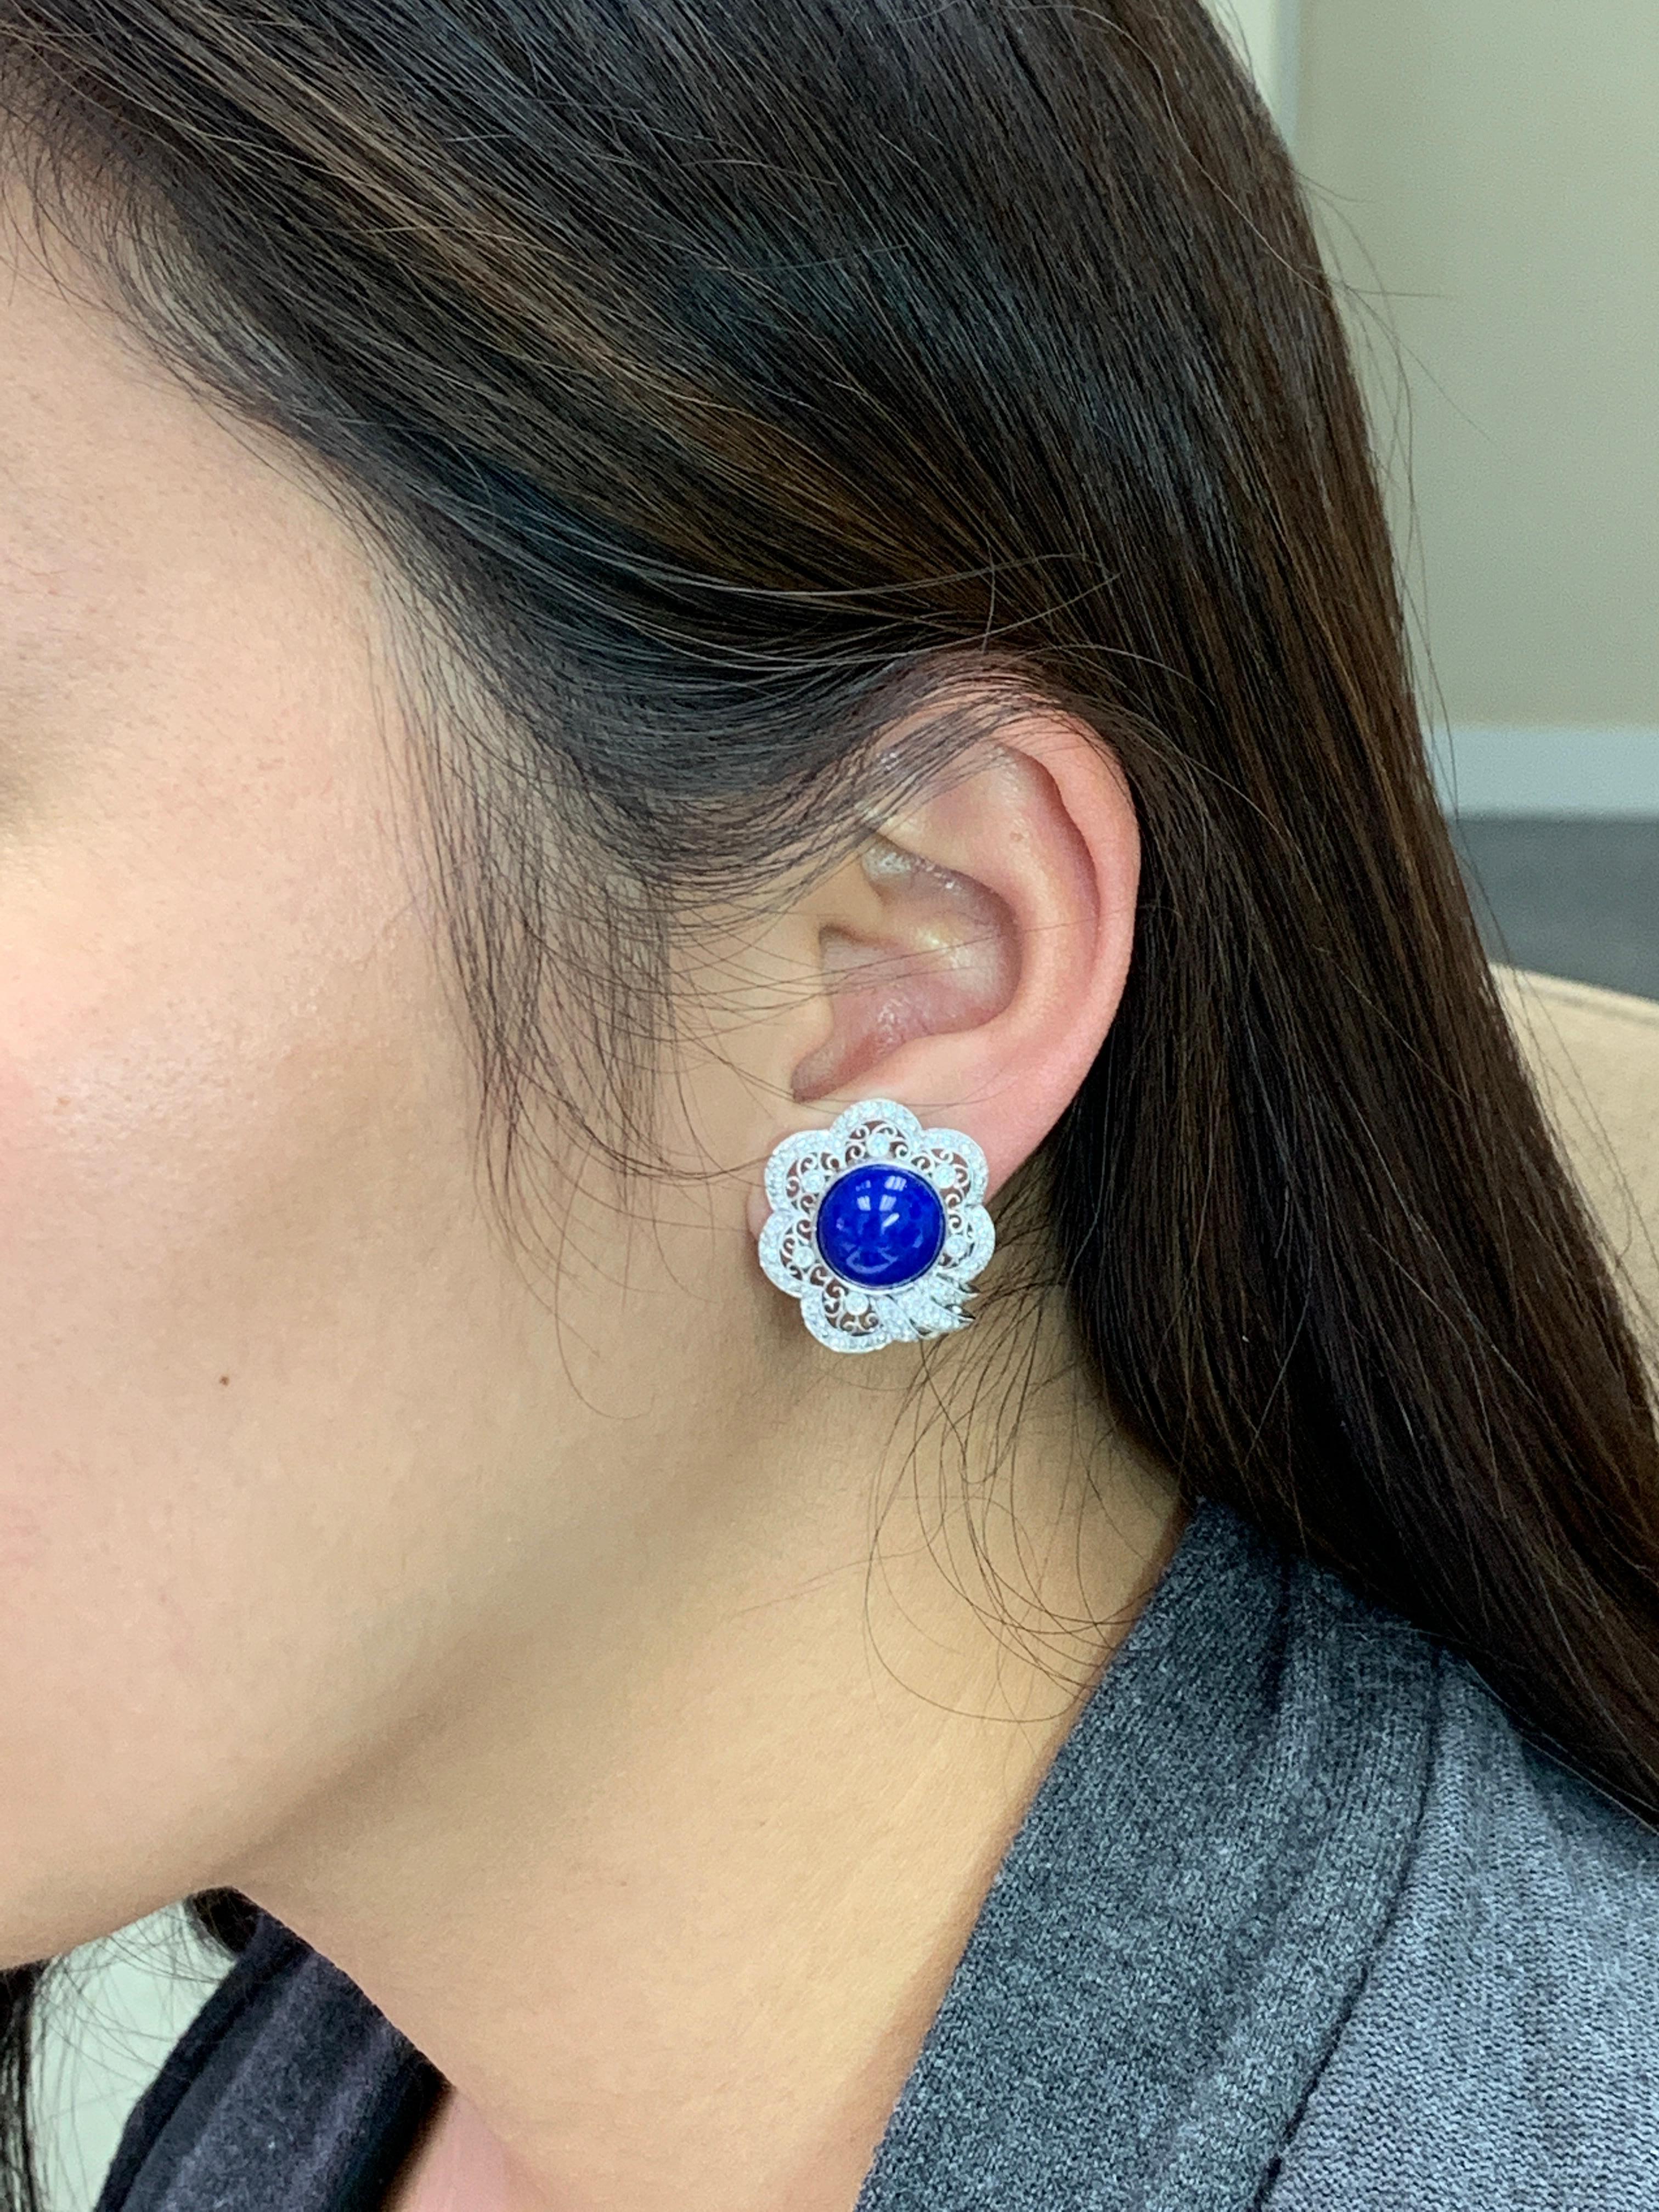 Please check out the HD video! Here is nice pair of earrings made with deep royal blue Lapis and diamonds. Lapis cabs are around 11.5mm each in diameter. There are about 1.24Cts of diamonds. The earrings are set in 18k white gold. The blue Lapis has